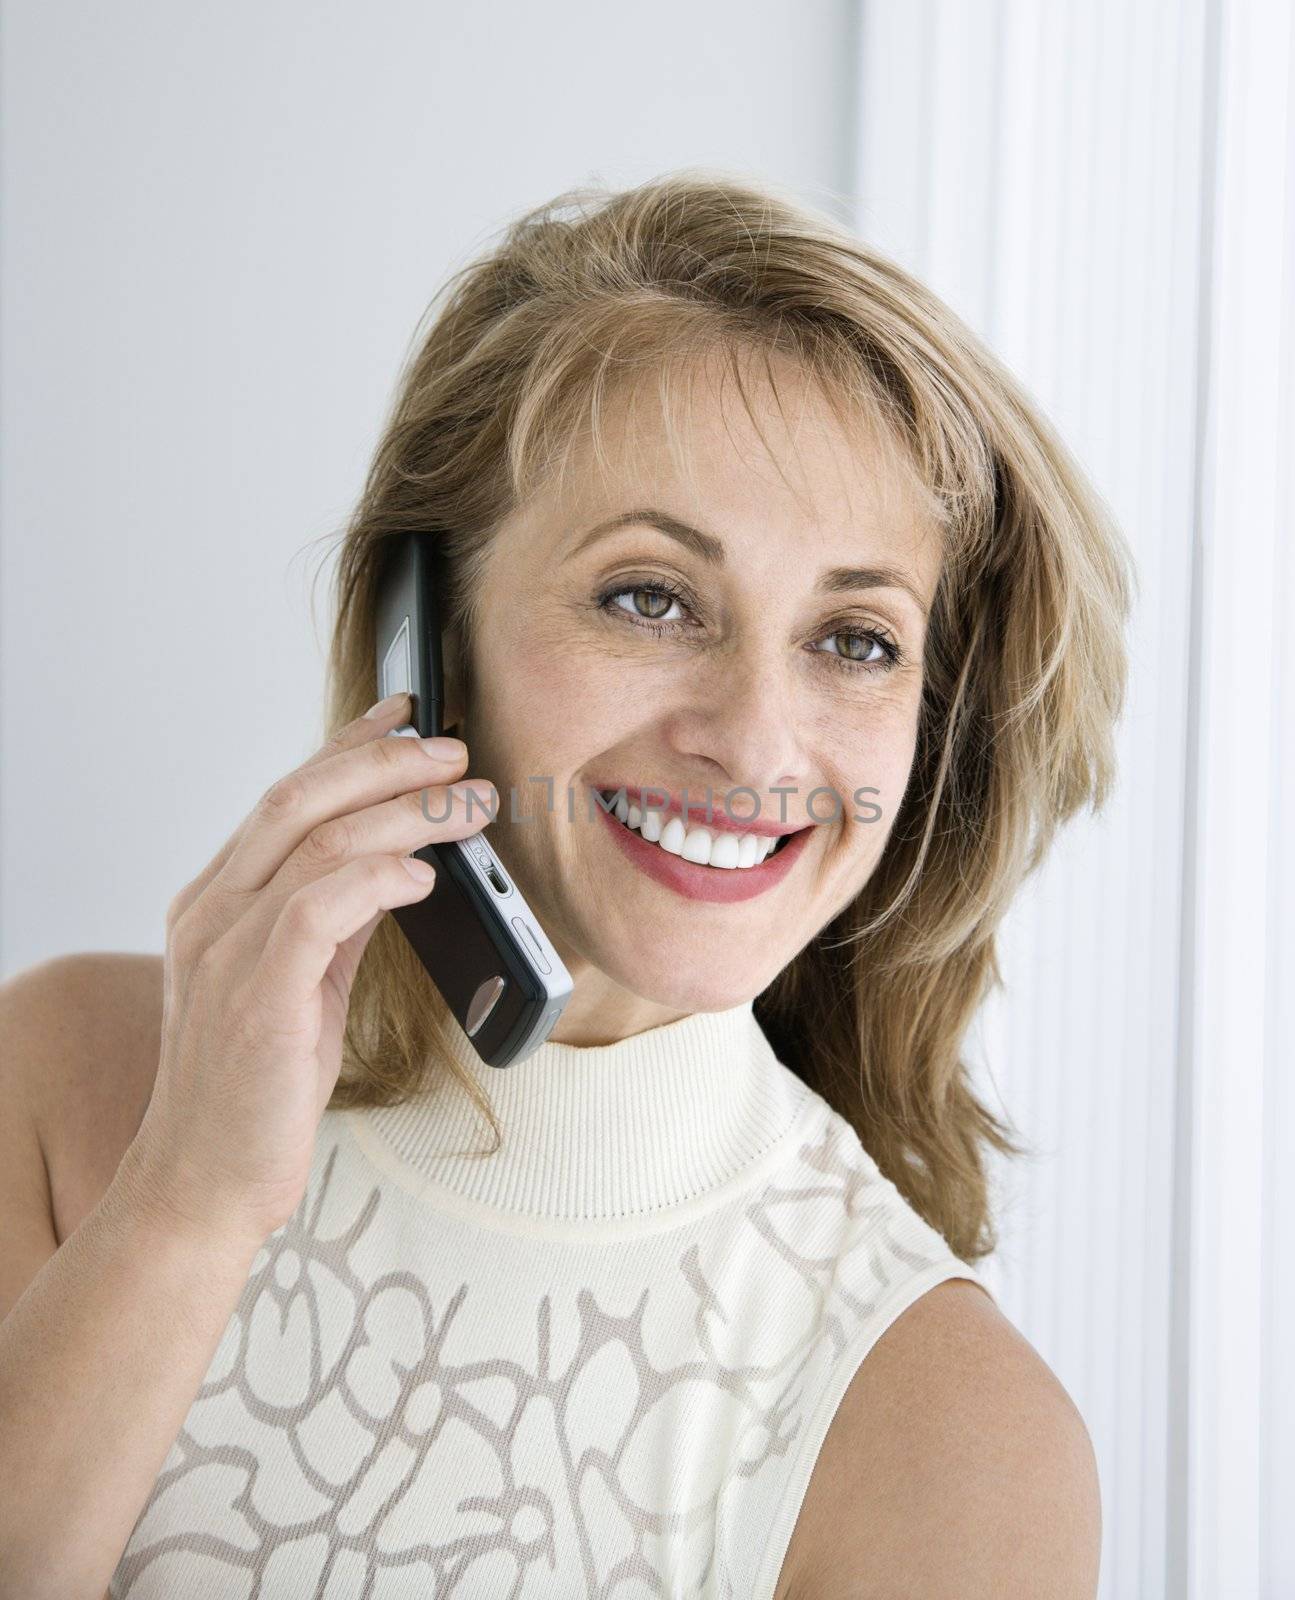 Caucasian woman smiling on cellphone.